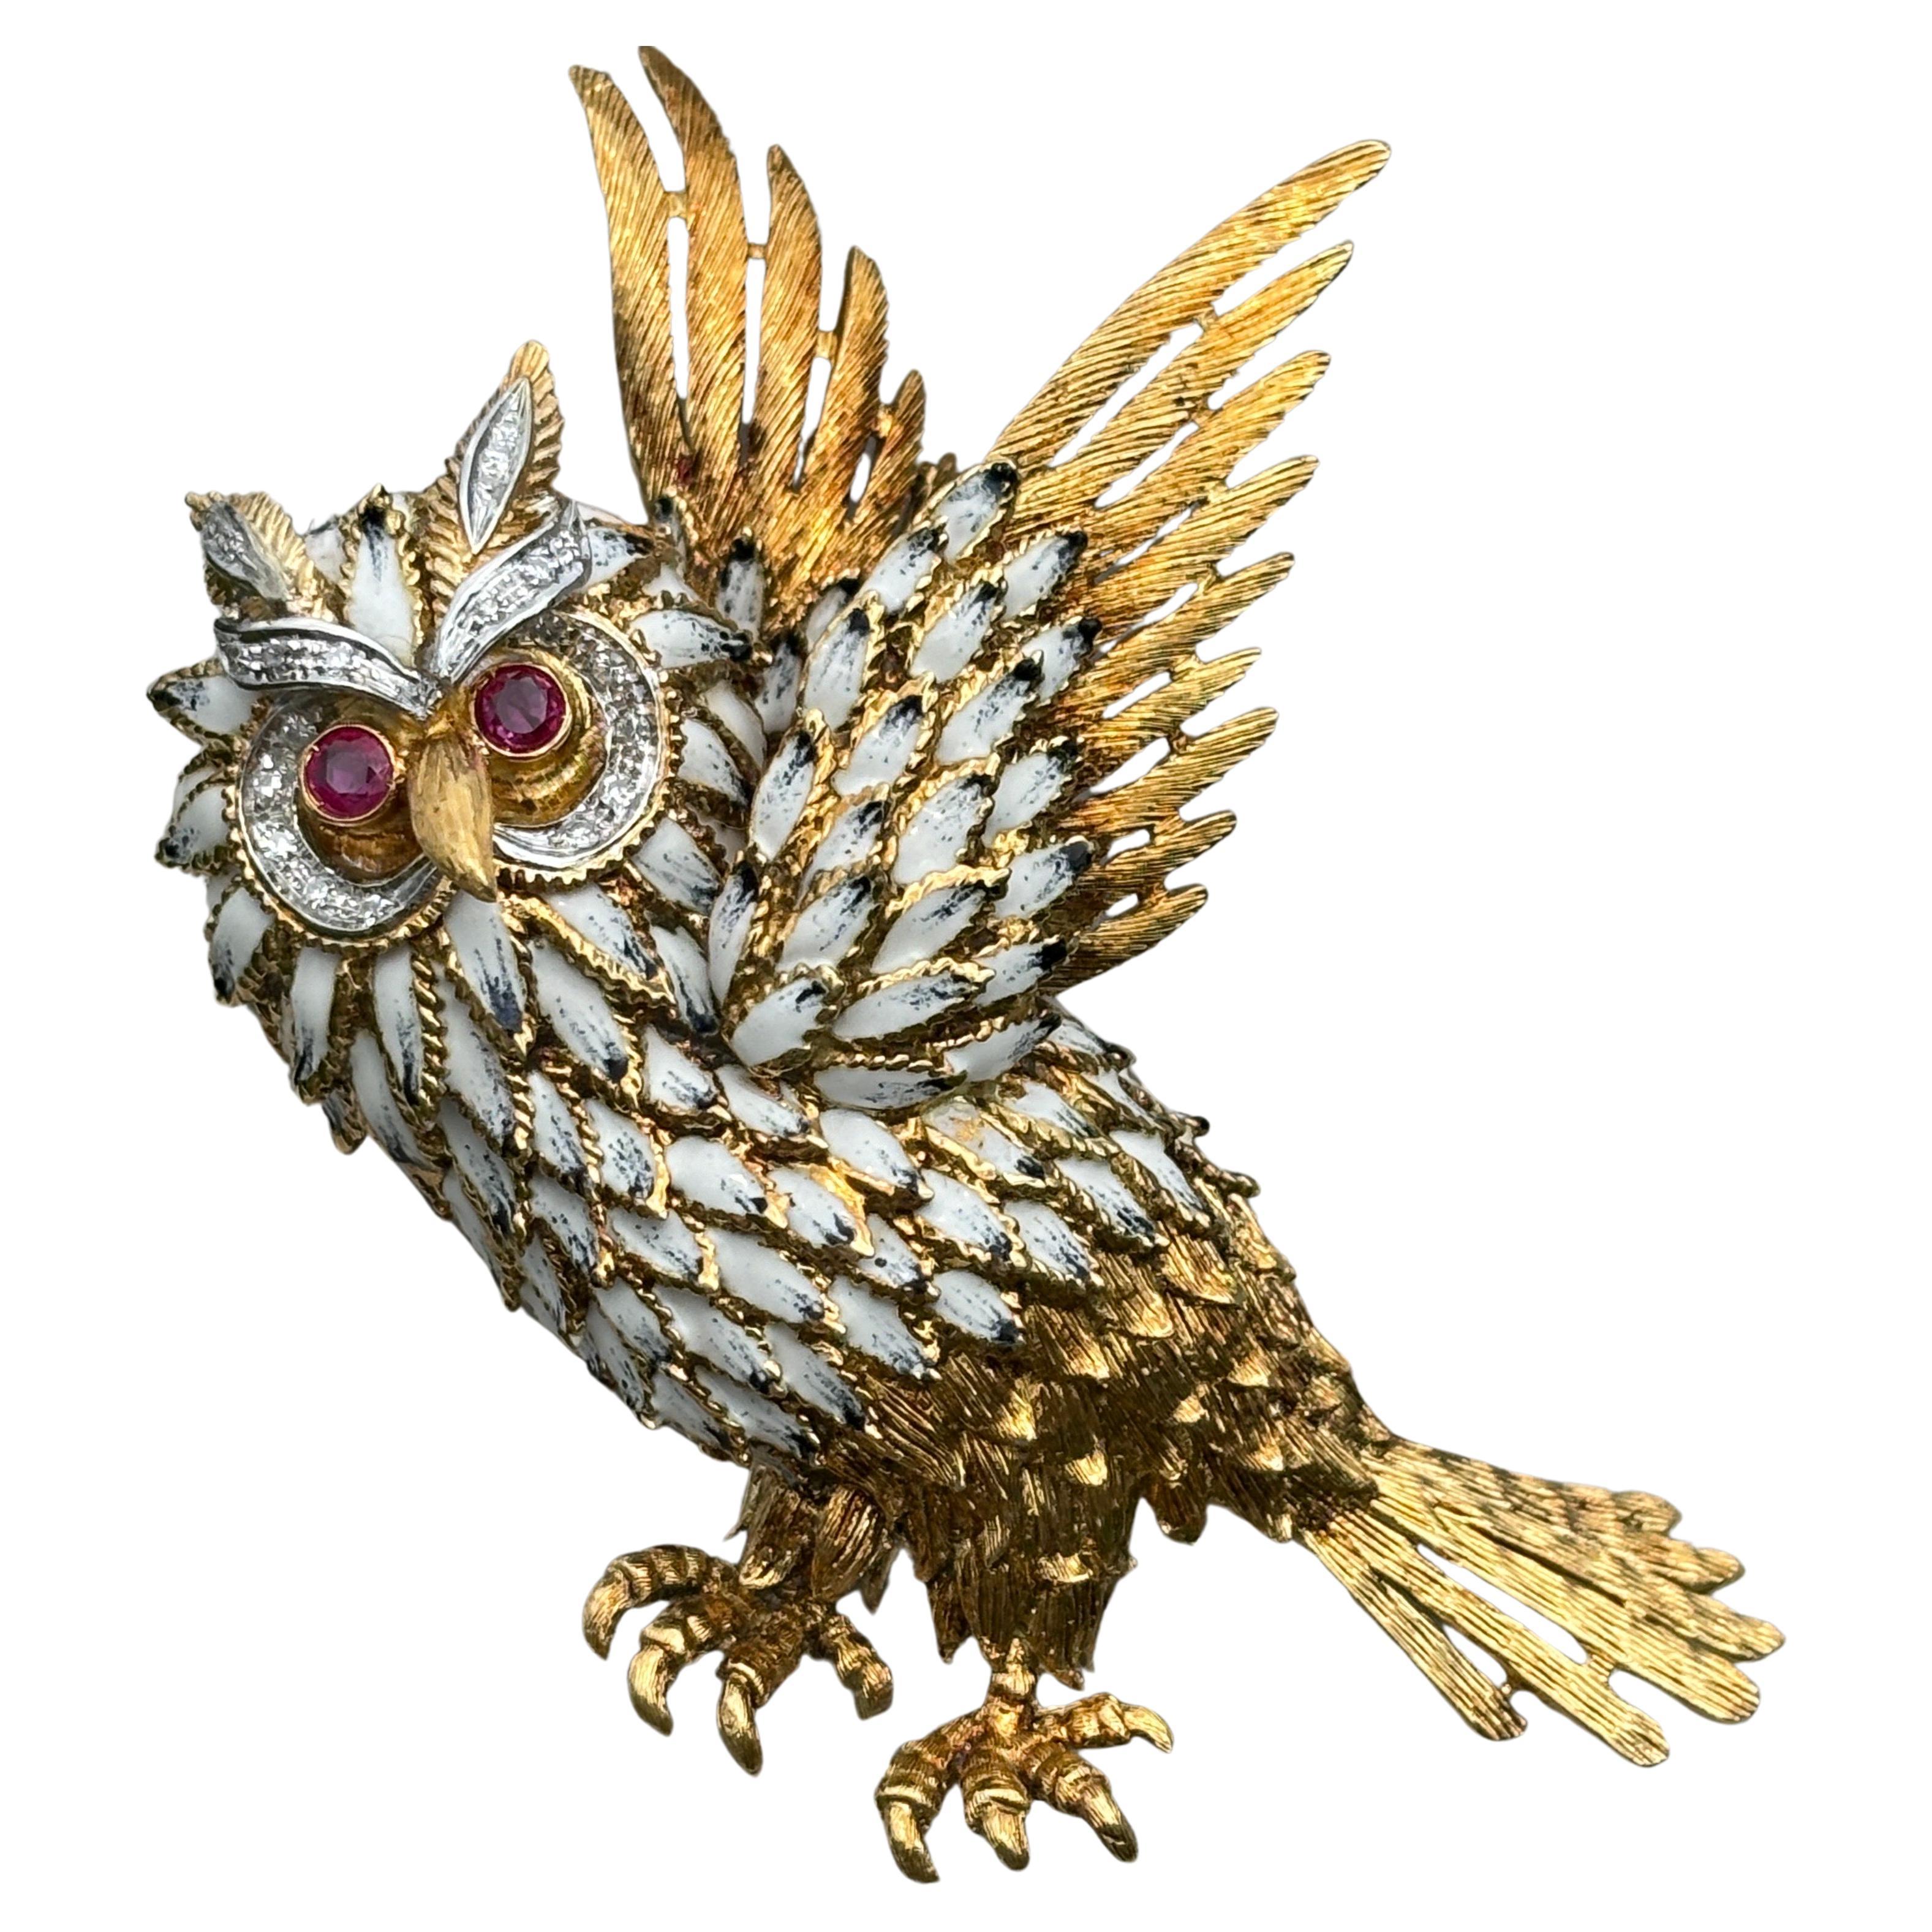 Up for your consideration is this large outstanding majestic owl brooch crafted from 18k yellow gold and adorned with Italian enamel, rubies, and diamonds. 

This owl  is a beautiful representation of vintage,antique gold jewelry craftsmanship. It's